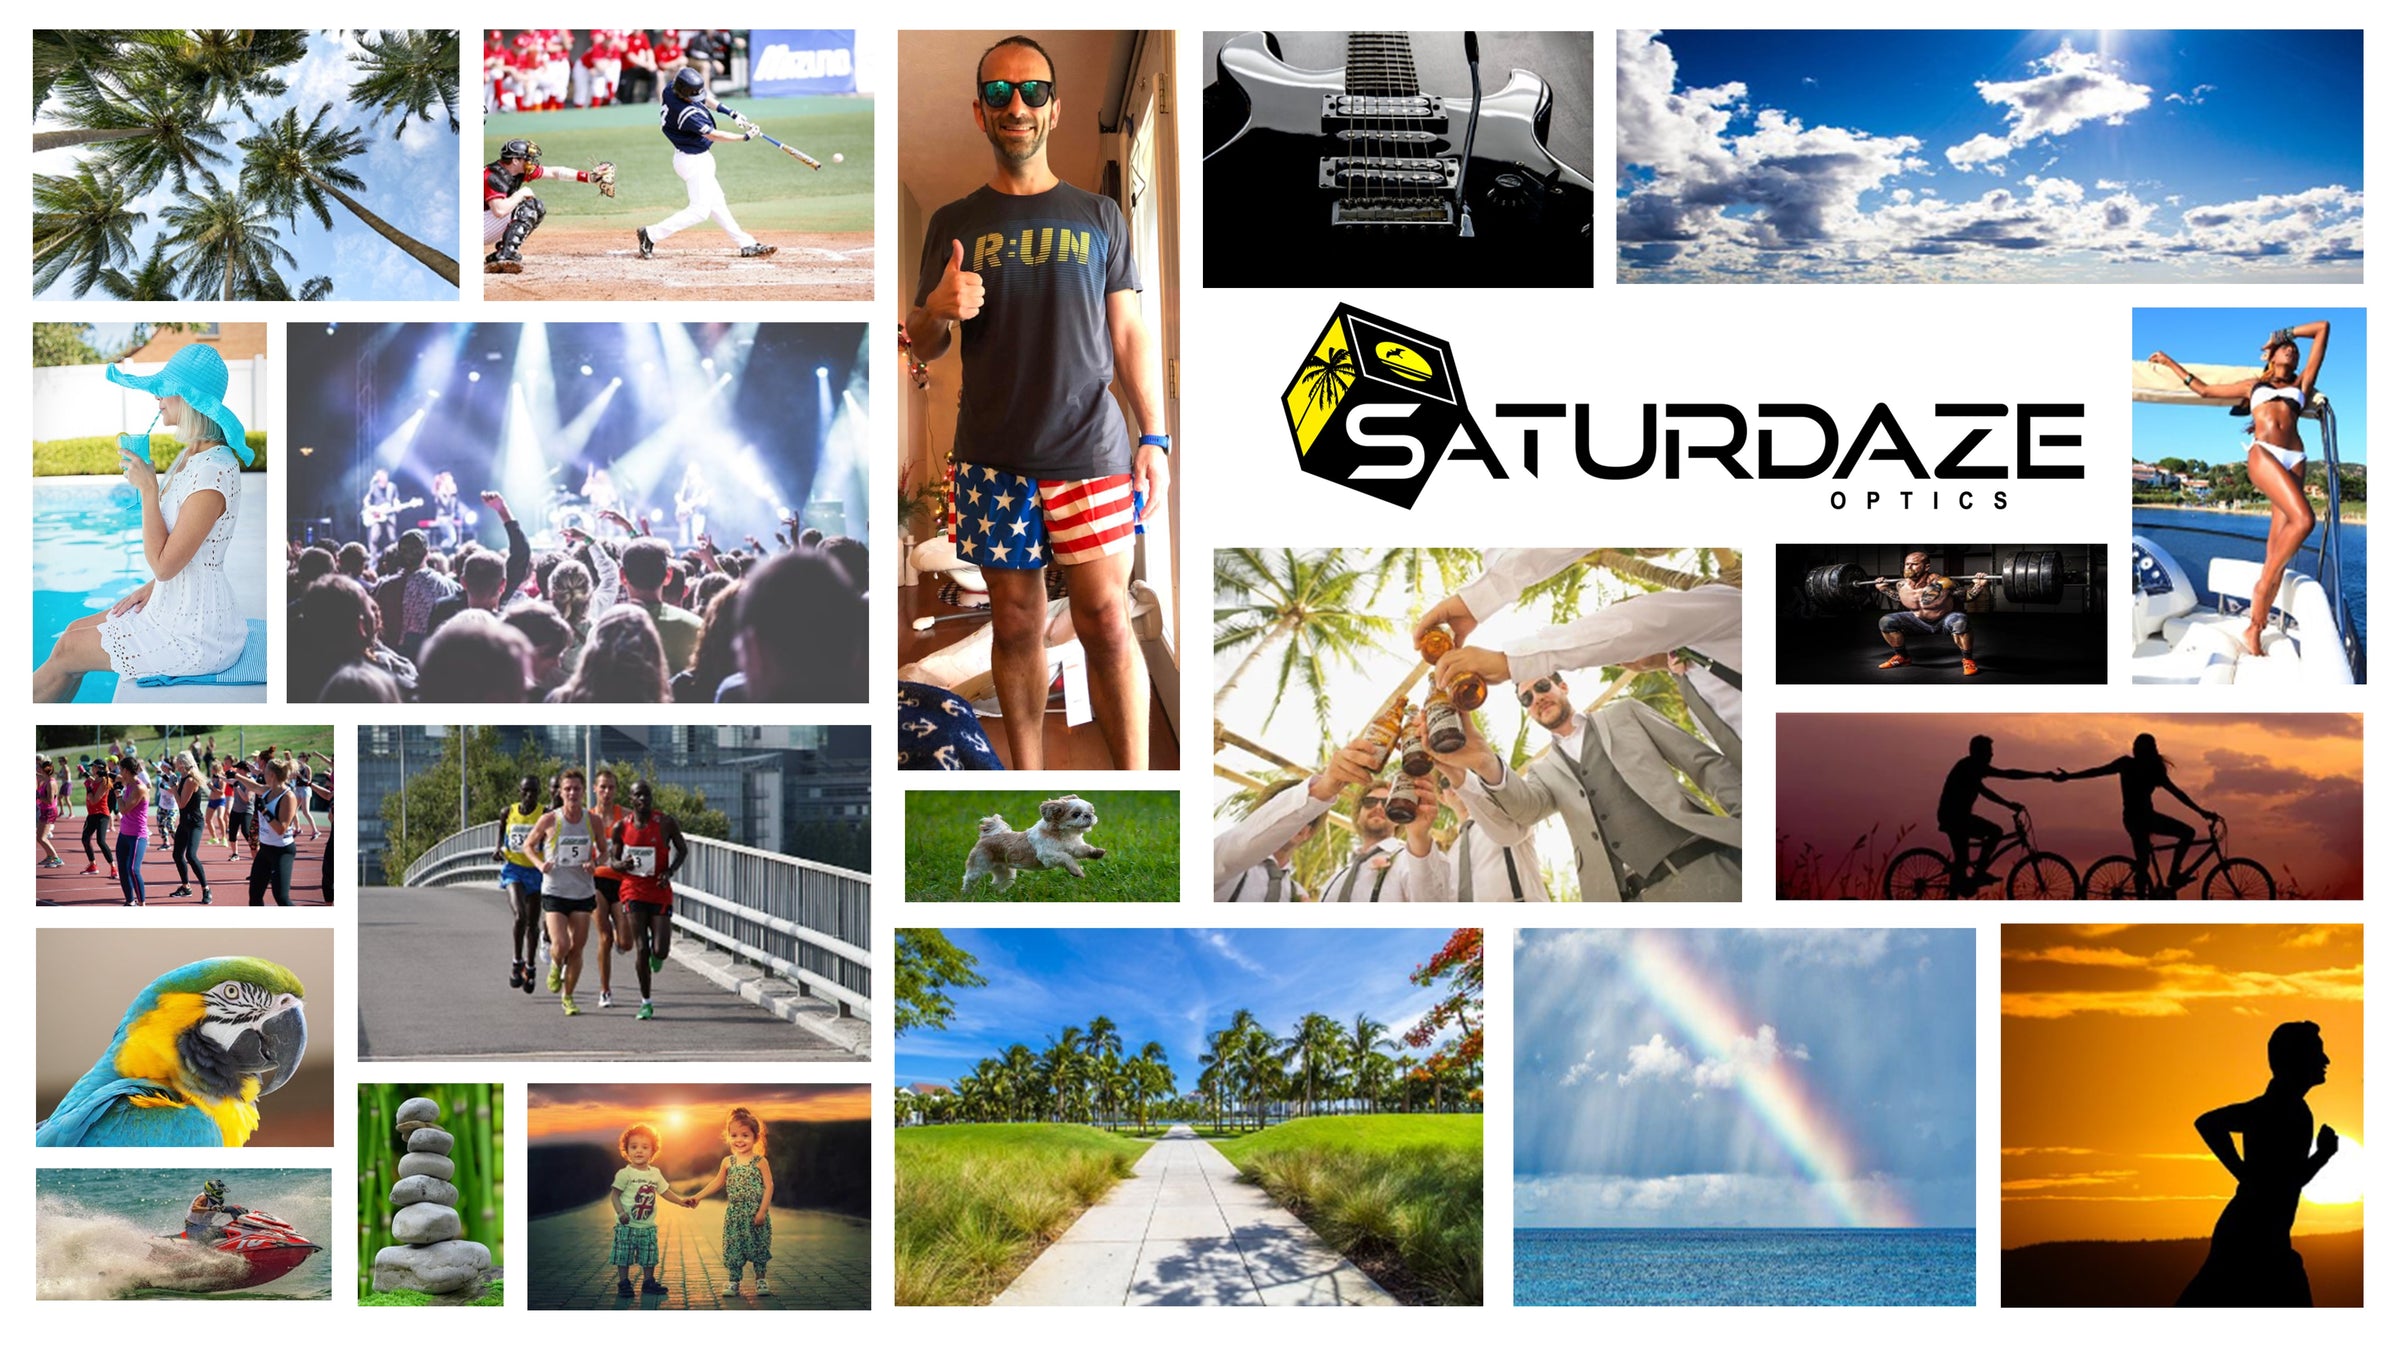 We love sunglasses. A picture collage of outdoor, fun, sporty activities enjoyed with sunglasses. Running, concert, ocean, pool, weightlifting, etc.